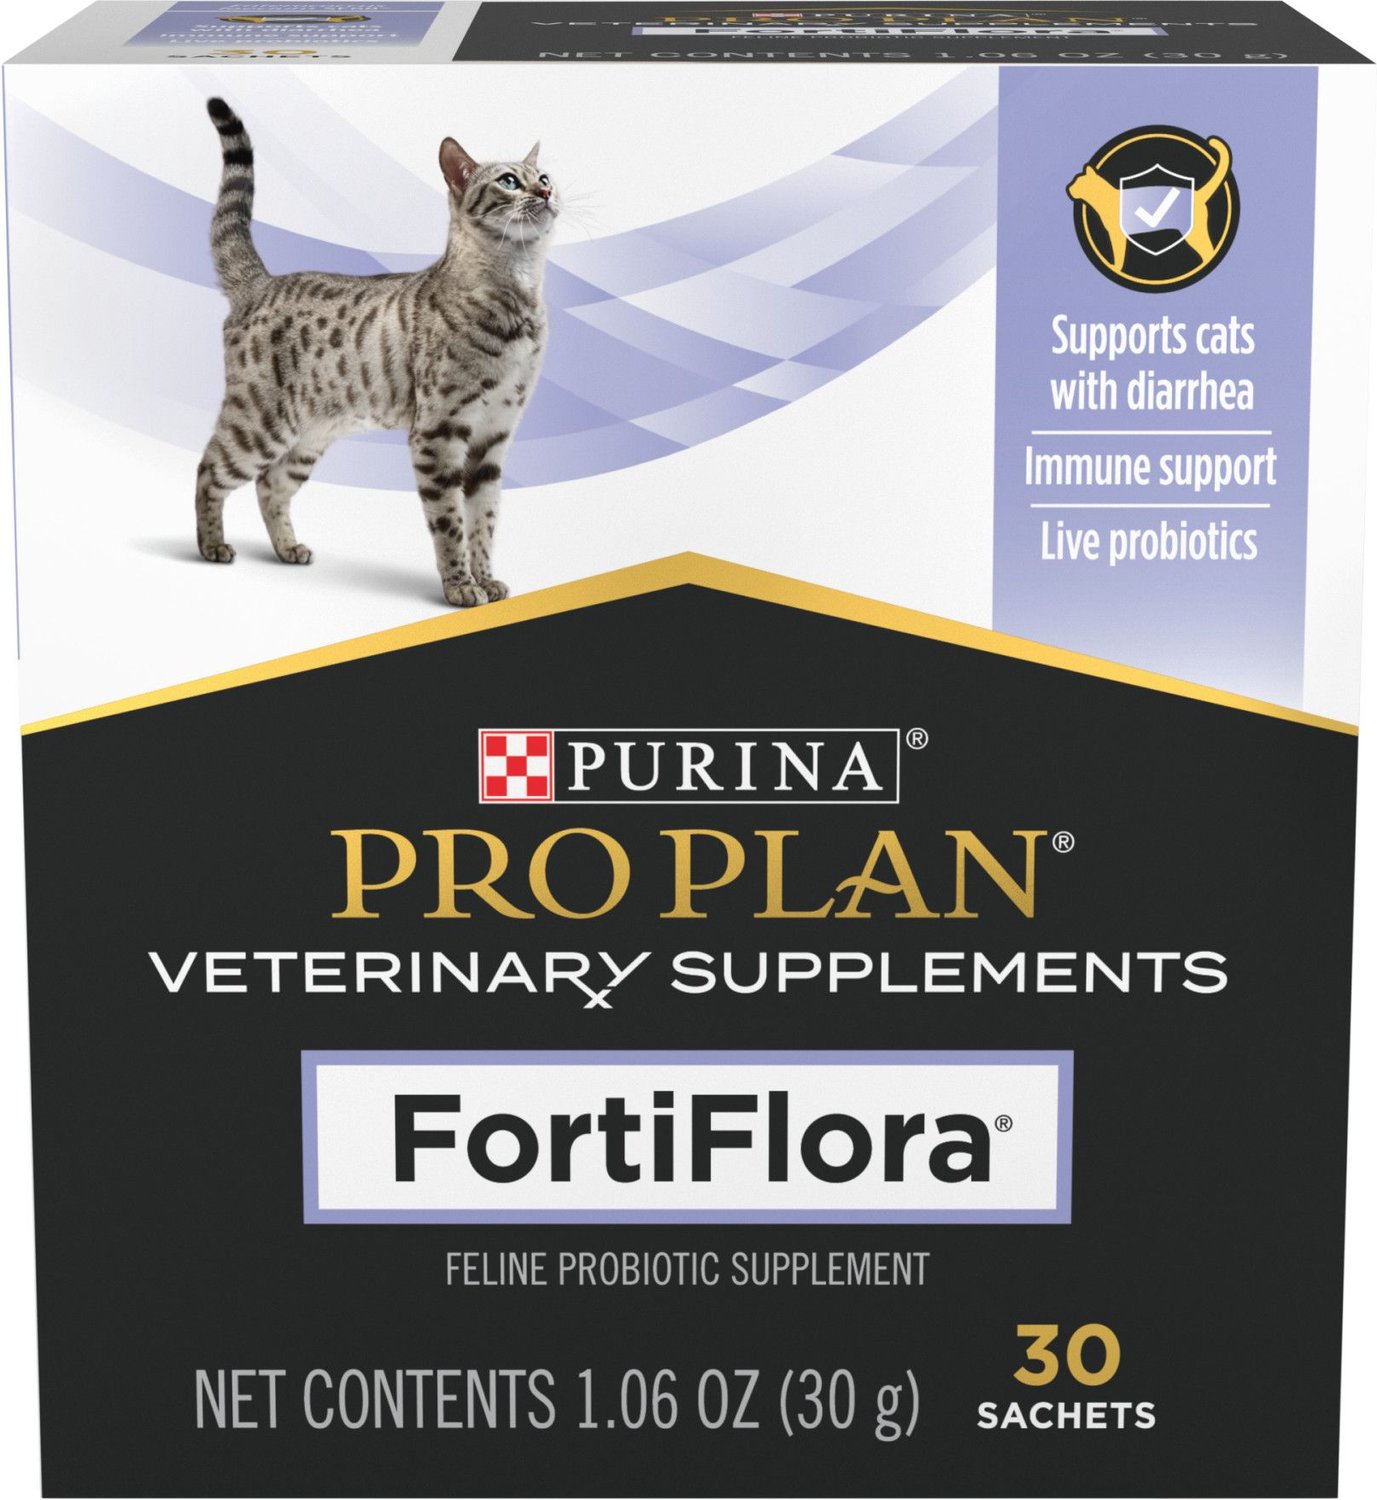 can i give my dog fortiflora twice a day